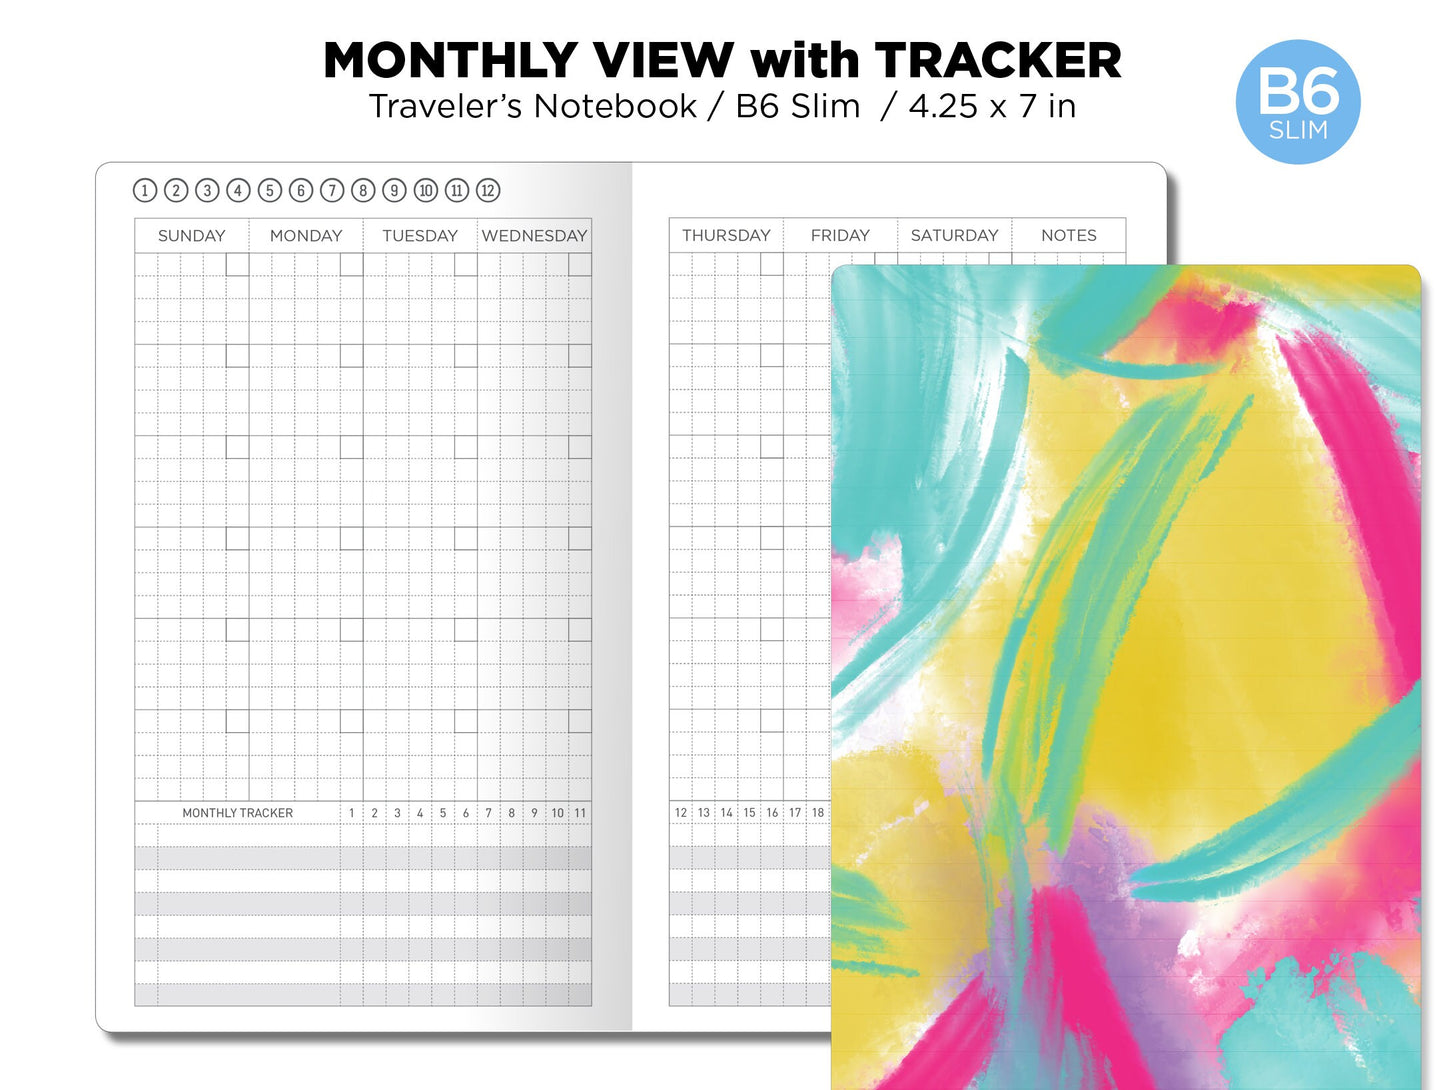 B6 SLIM Monthly View With Tracker GRID Traveler's Notebook Printable Insert